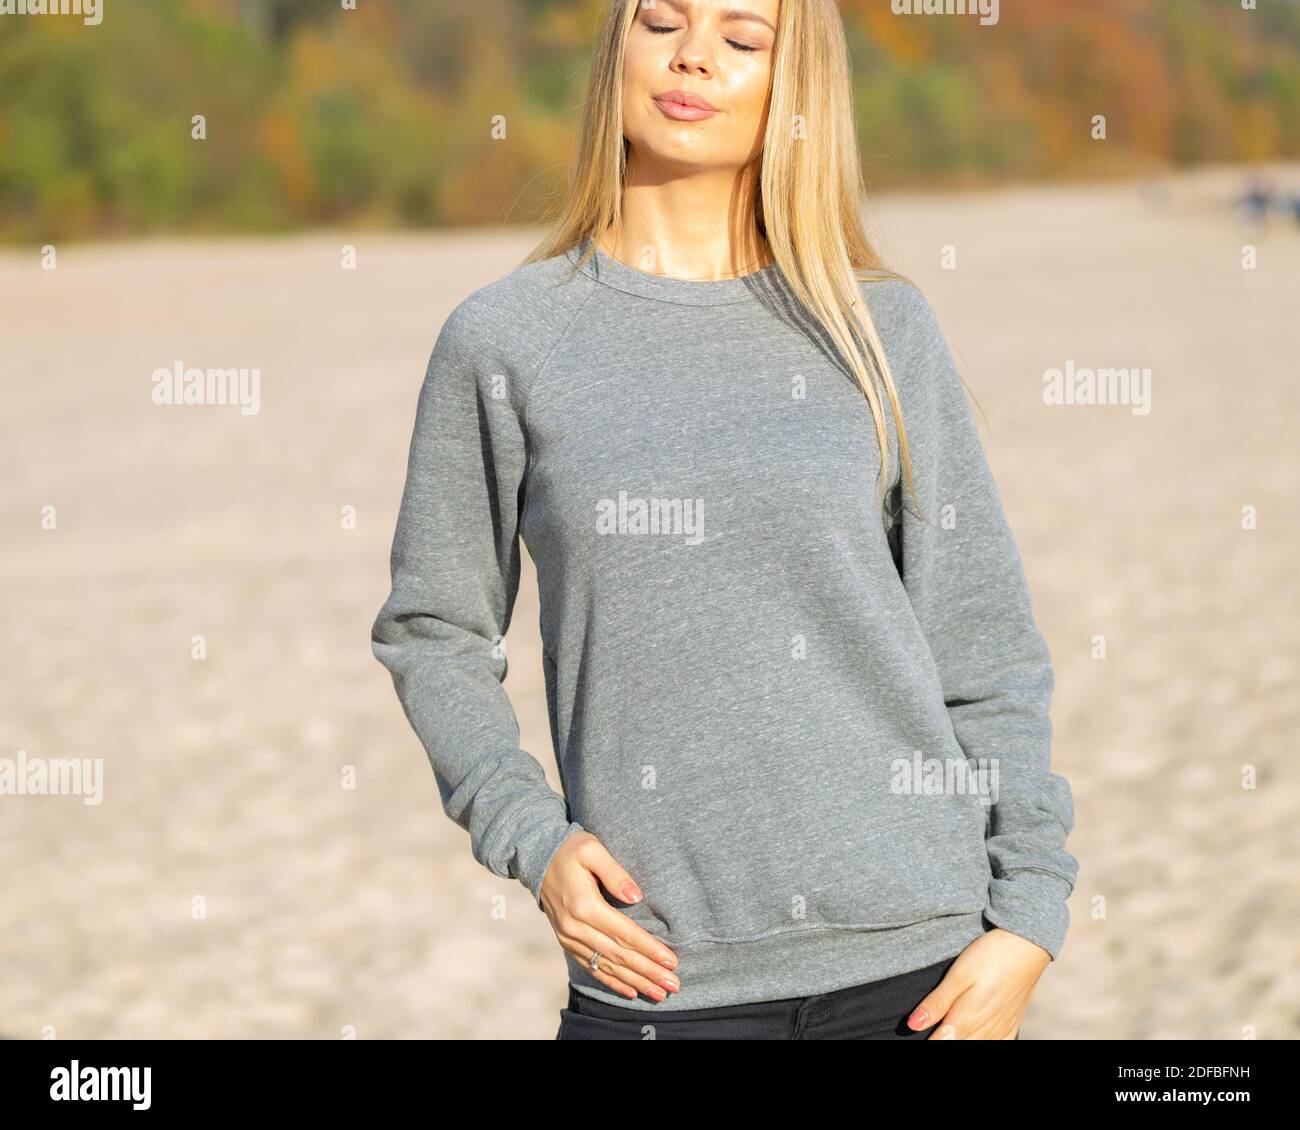 Smiling blond woman with closed eyes standing on beach. She is wearing grey hoodie. Fashion mockup with casual outfit. Stock Photo